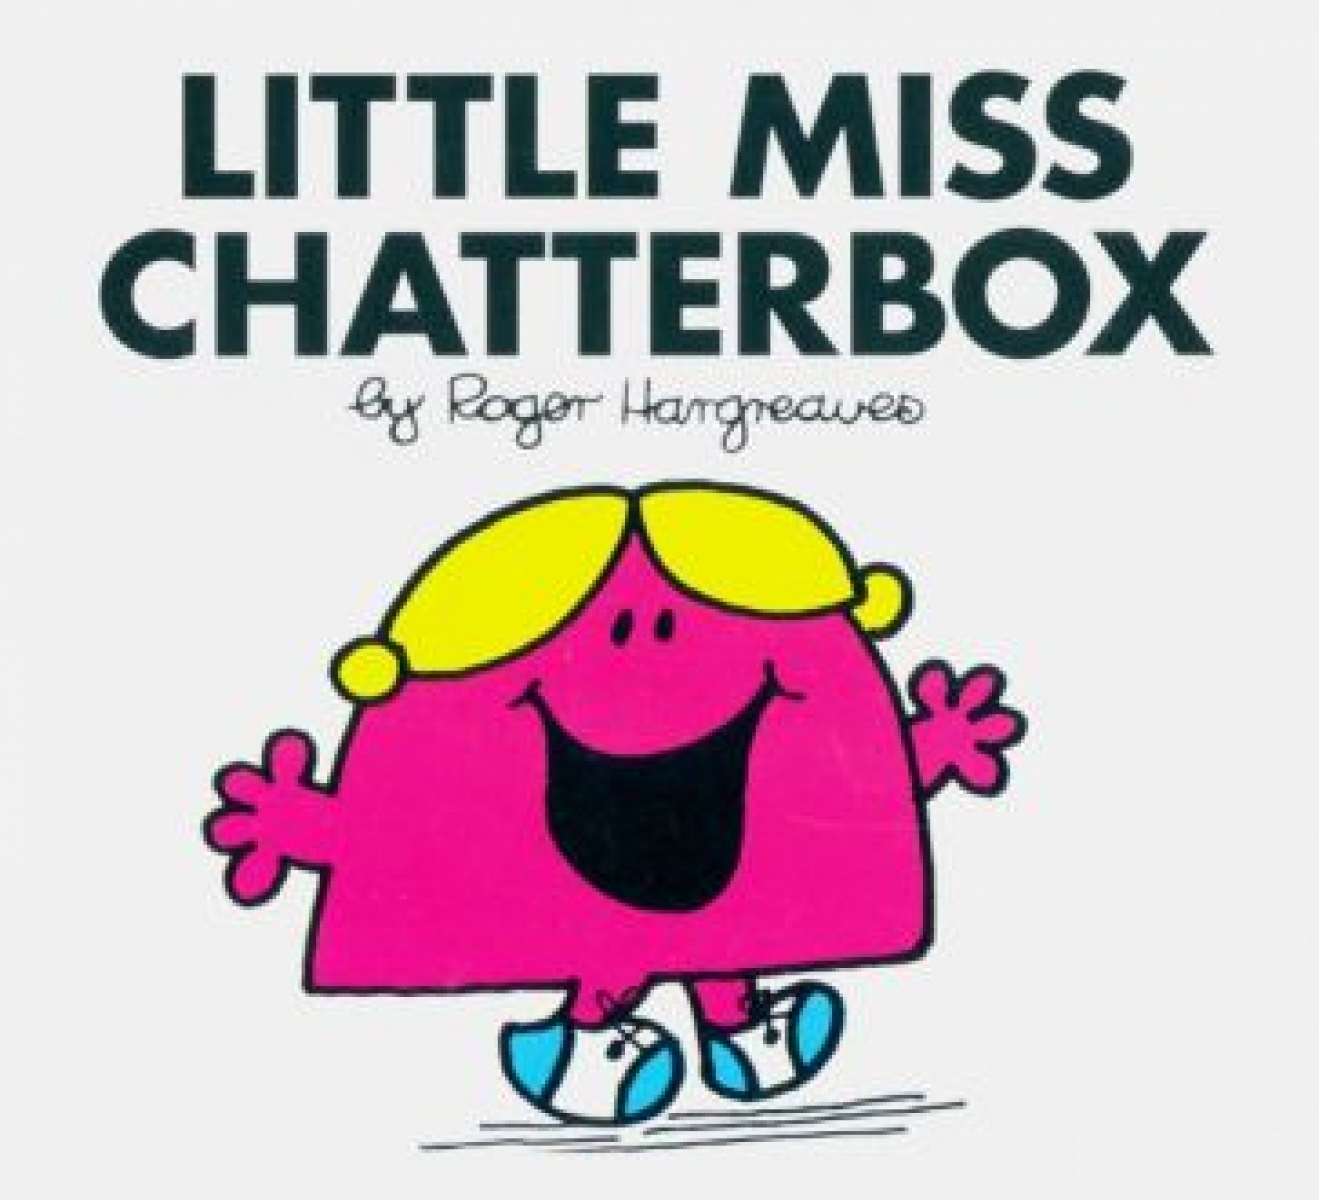 Hargreaves Roger Little Miss Chatterbox 